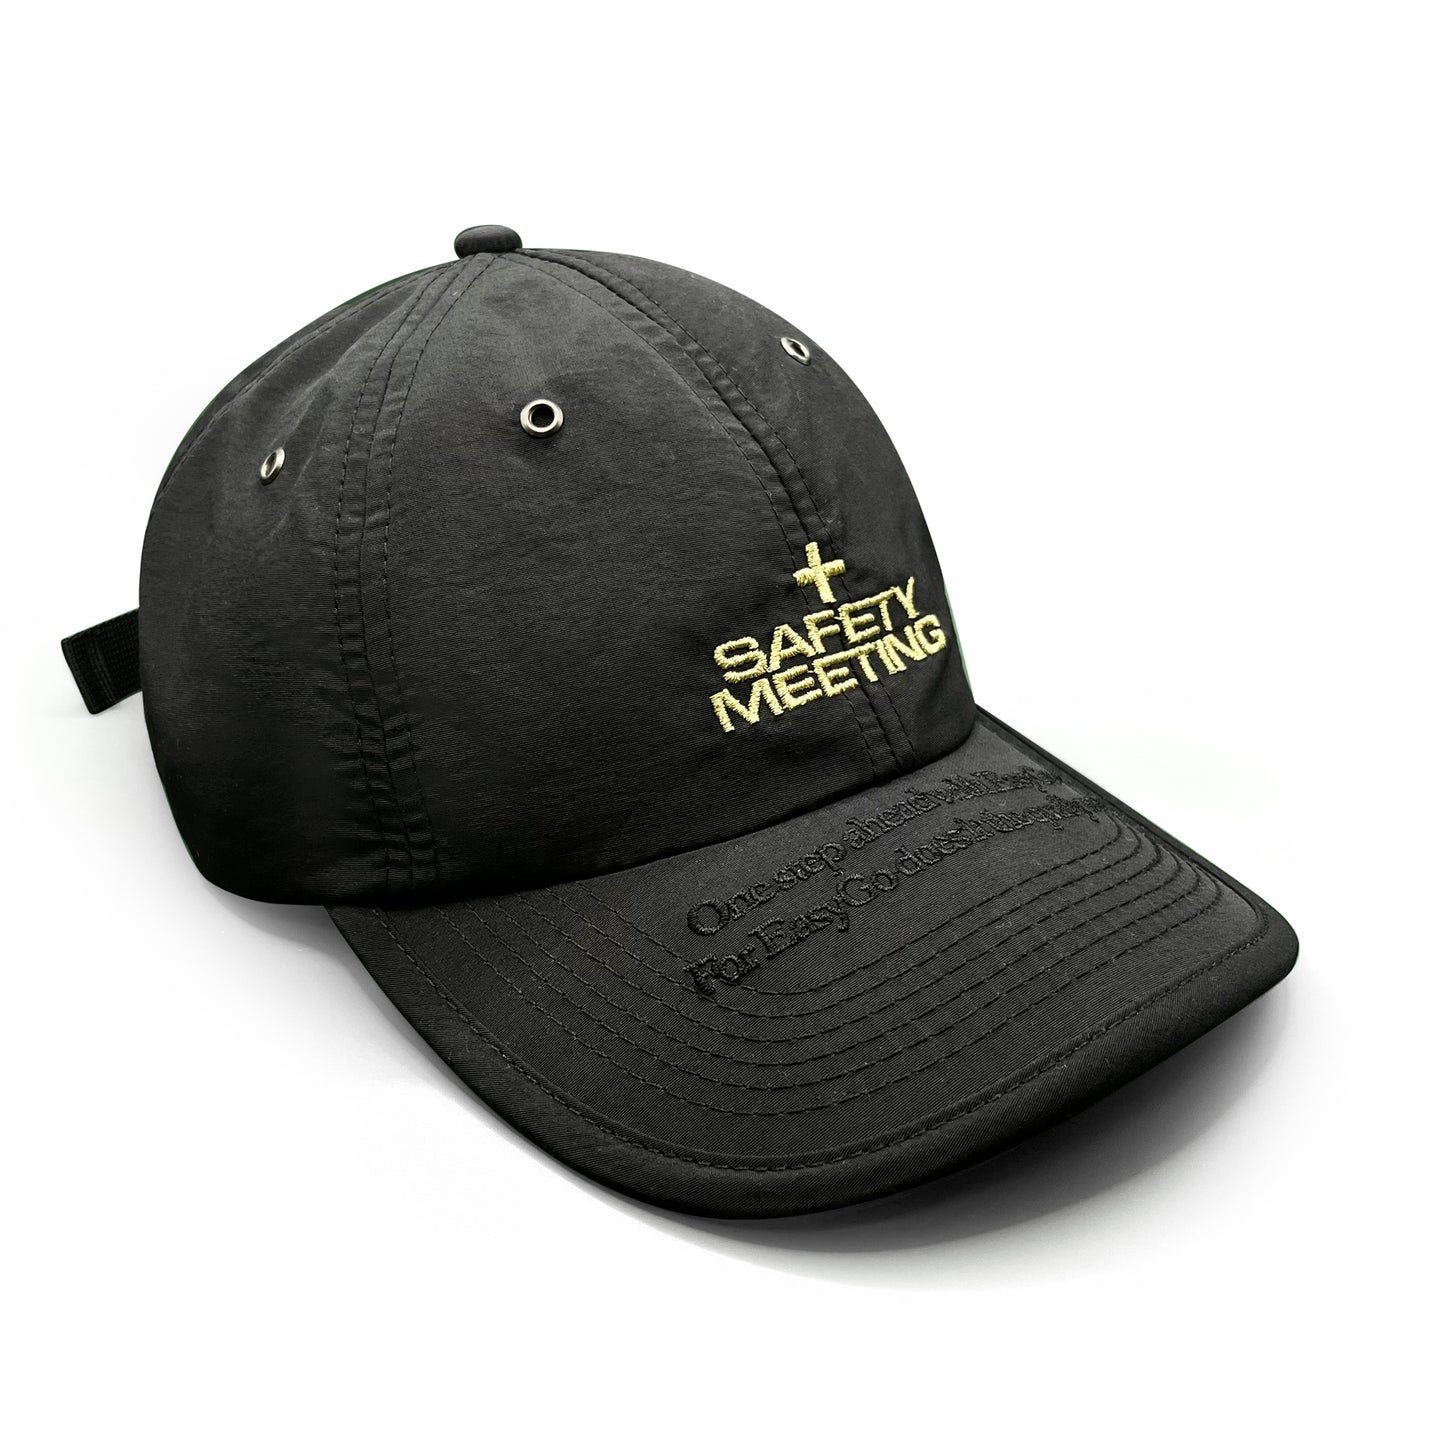 EasyGo "Safety Meeting" 6 Panel Cap